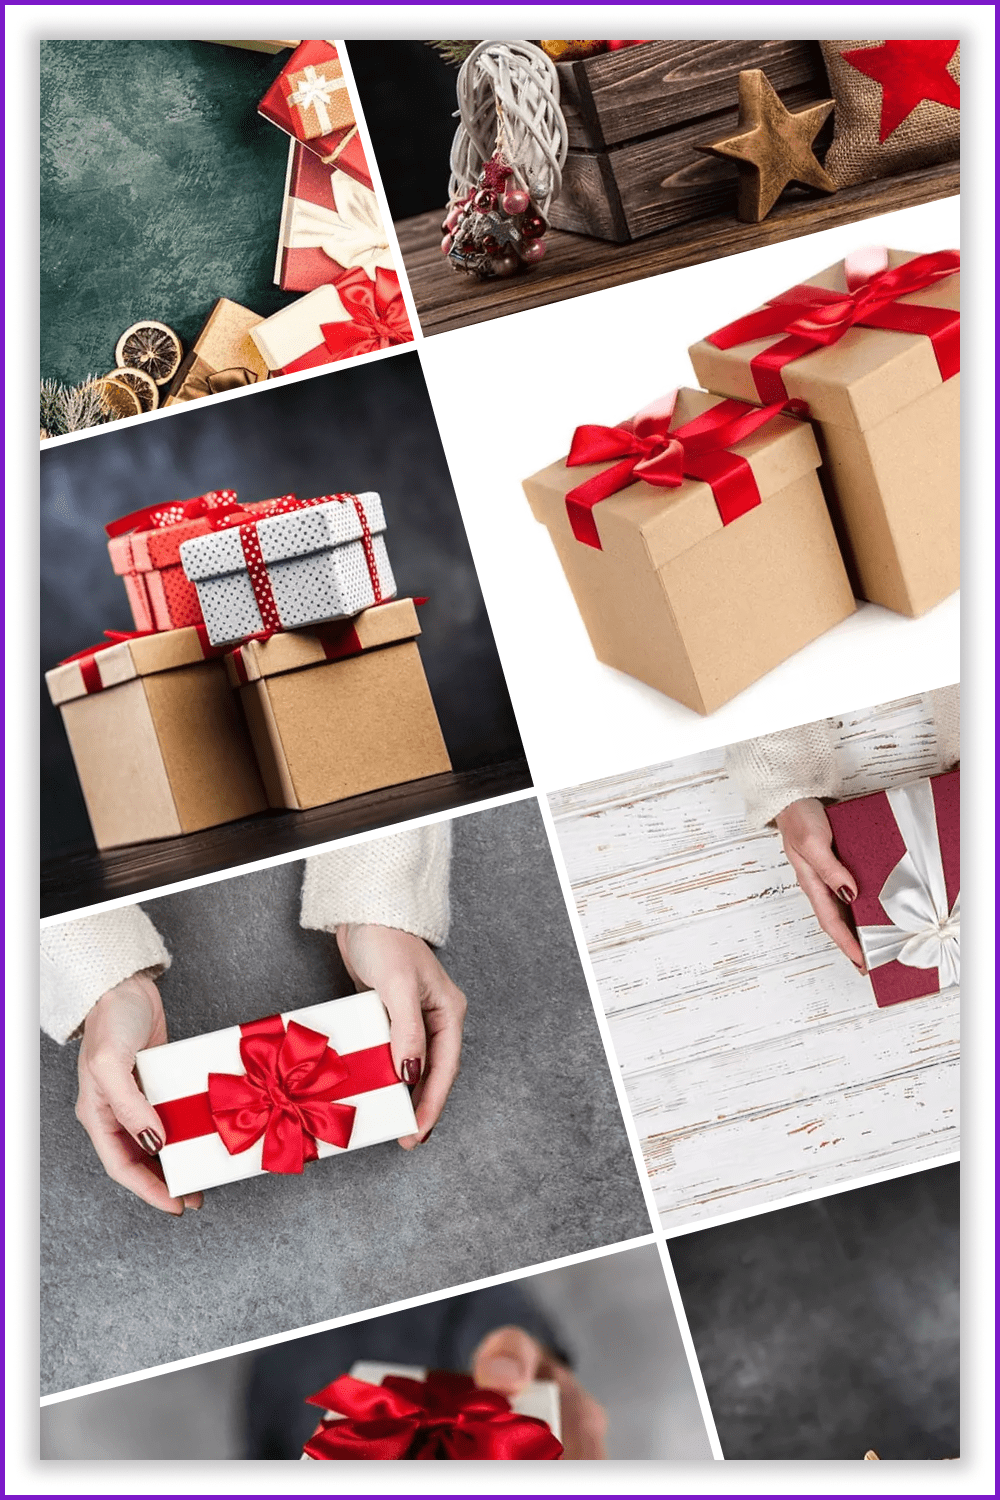 Collage of photos of gifts with red bows.